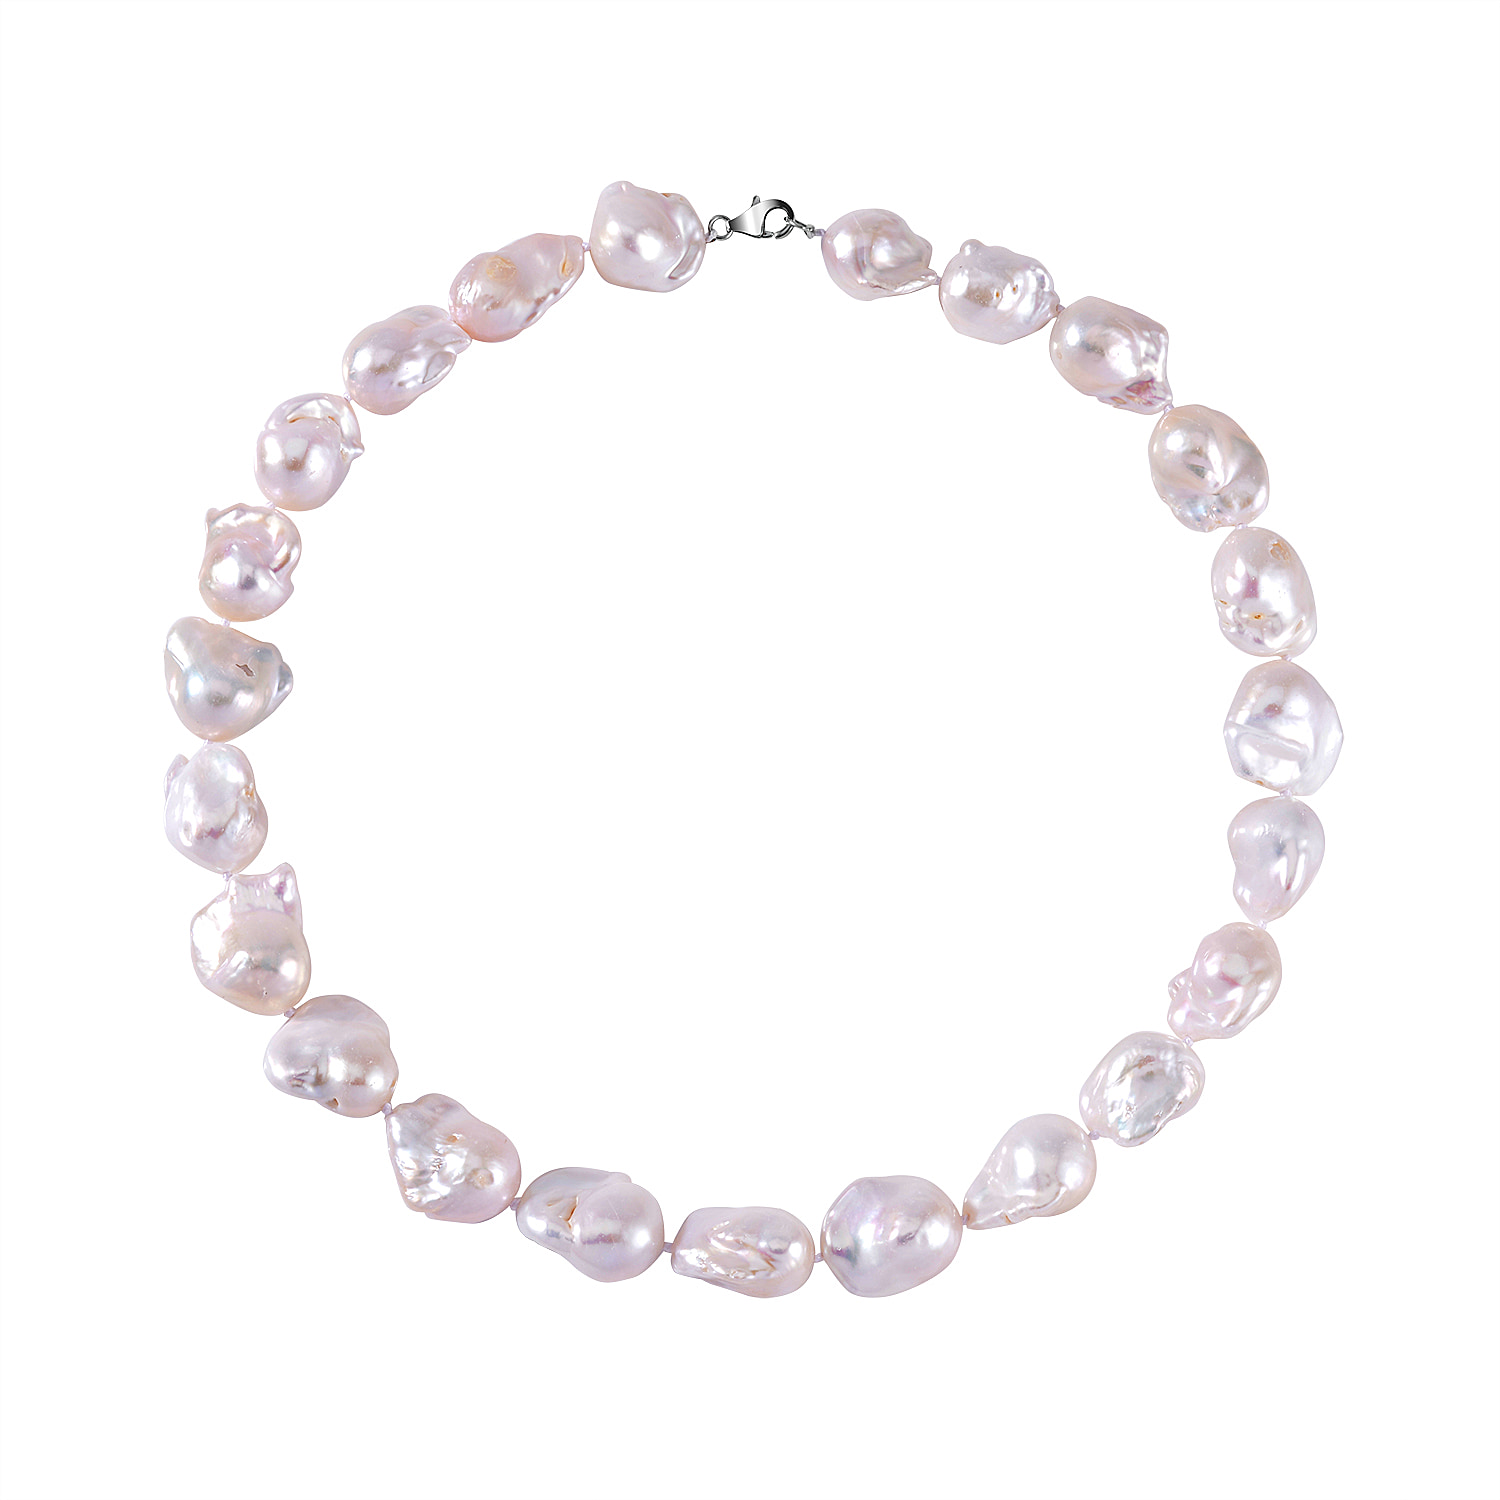 Limited Edition 950 Platinum AAAA Baroque Pearl Necklace (Size 20)